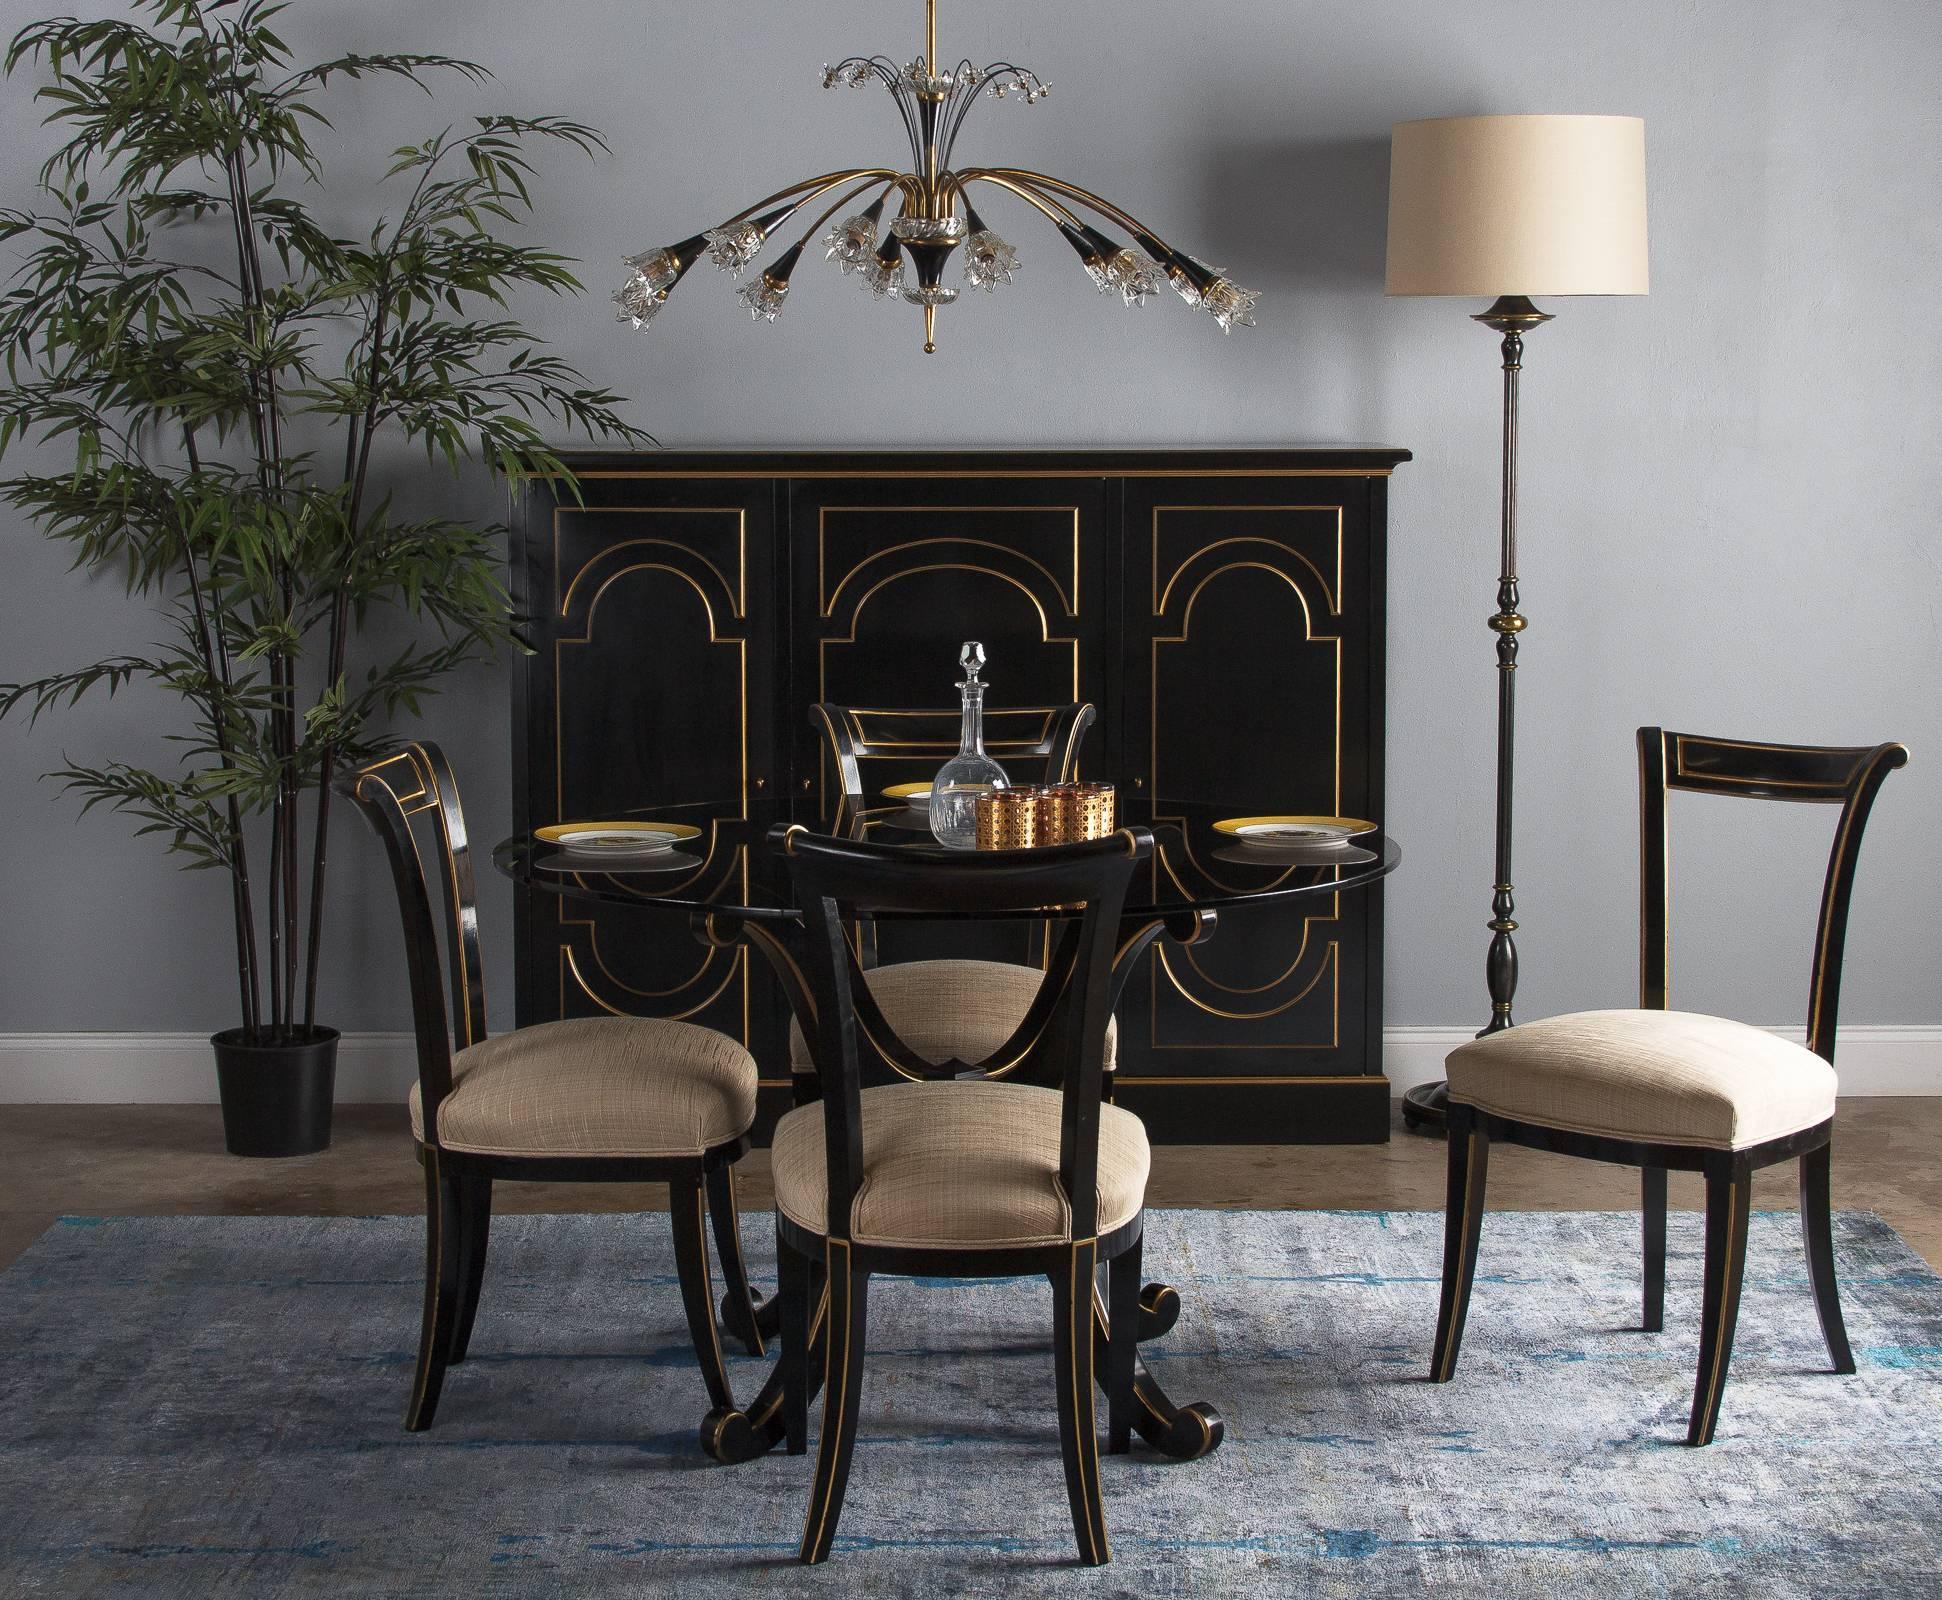 A set of four urbane neoclassical style varnished ebony chairs from designer Maurice Hirsch, circa 1950s. Glossy black varnish coats the wood frame. The back flares out and back gently, ending in scrolled corners and connected by a single slat at